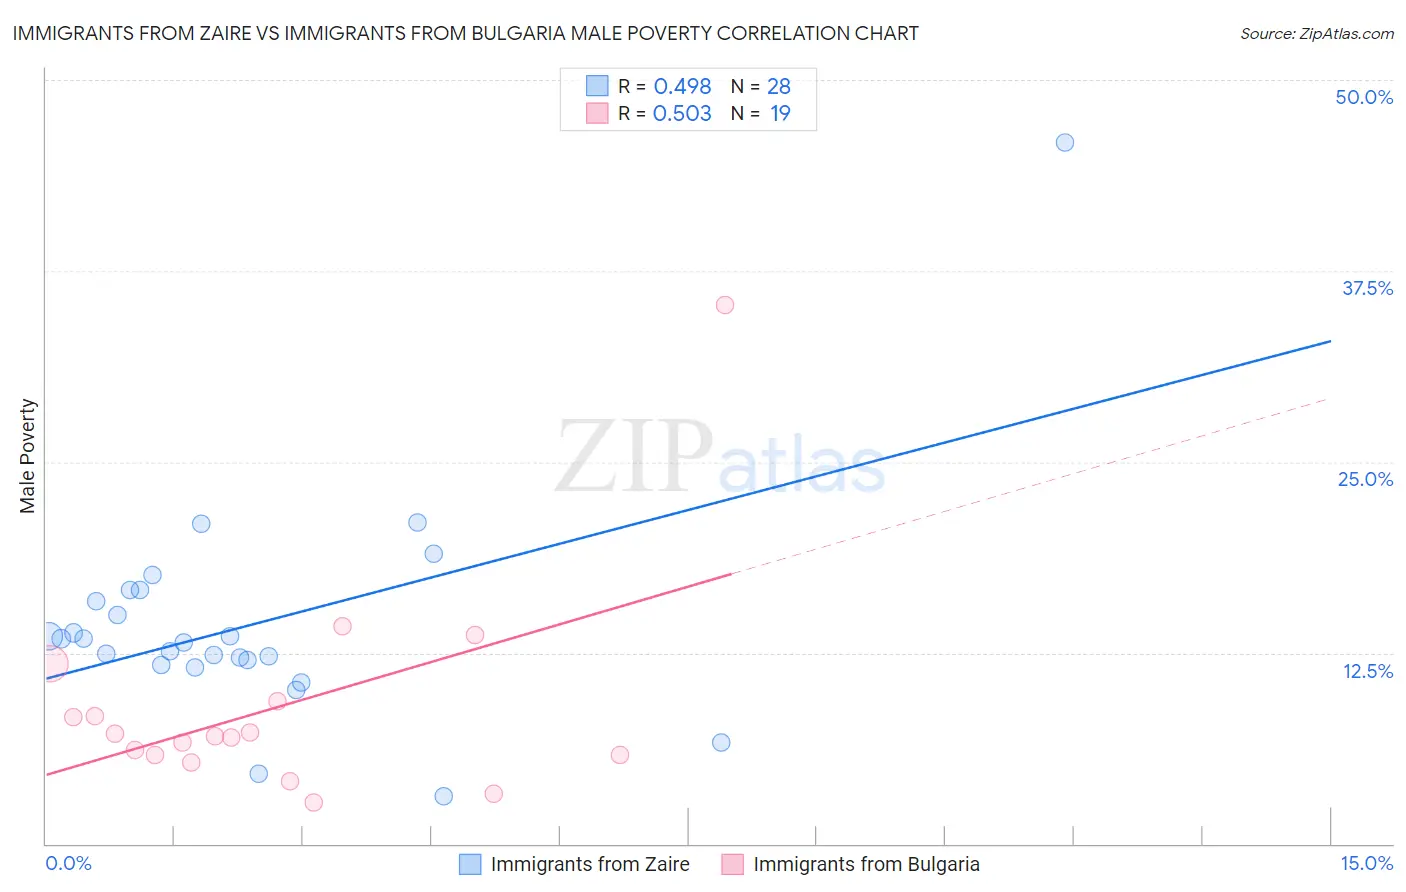 Immigrants from Zaire vs Immigrants from Bulgaria Male Poverty